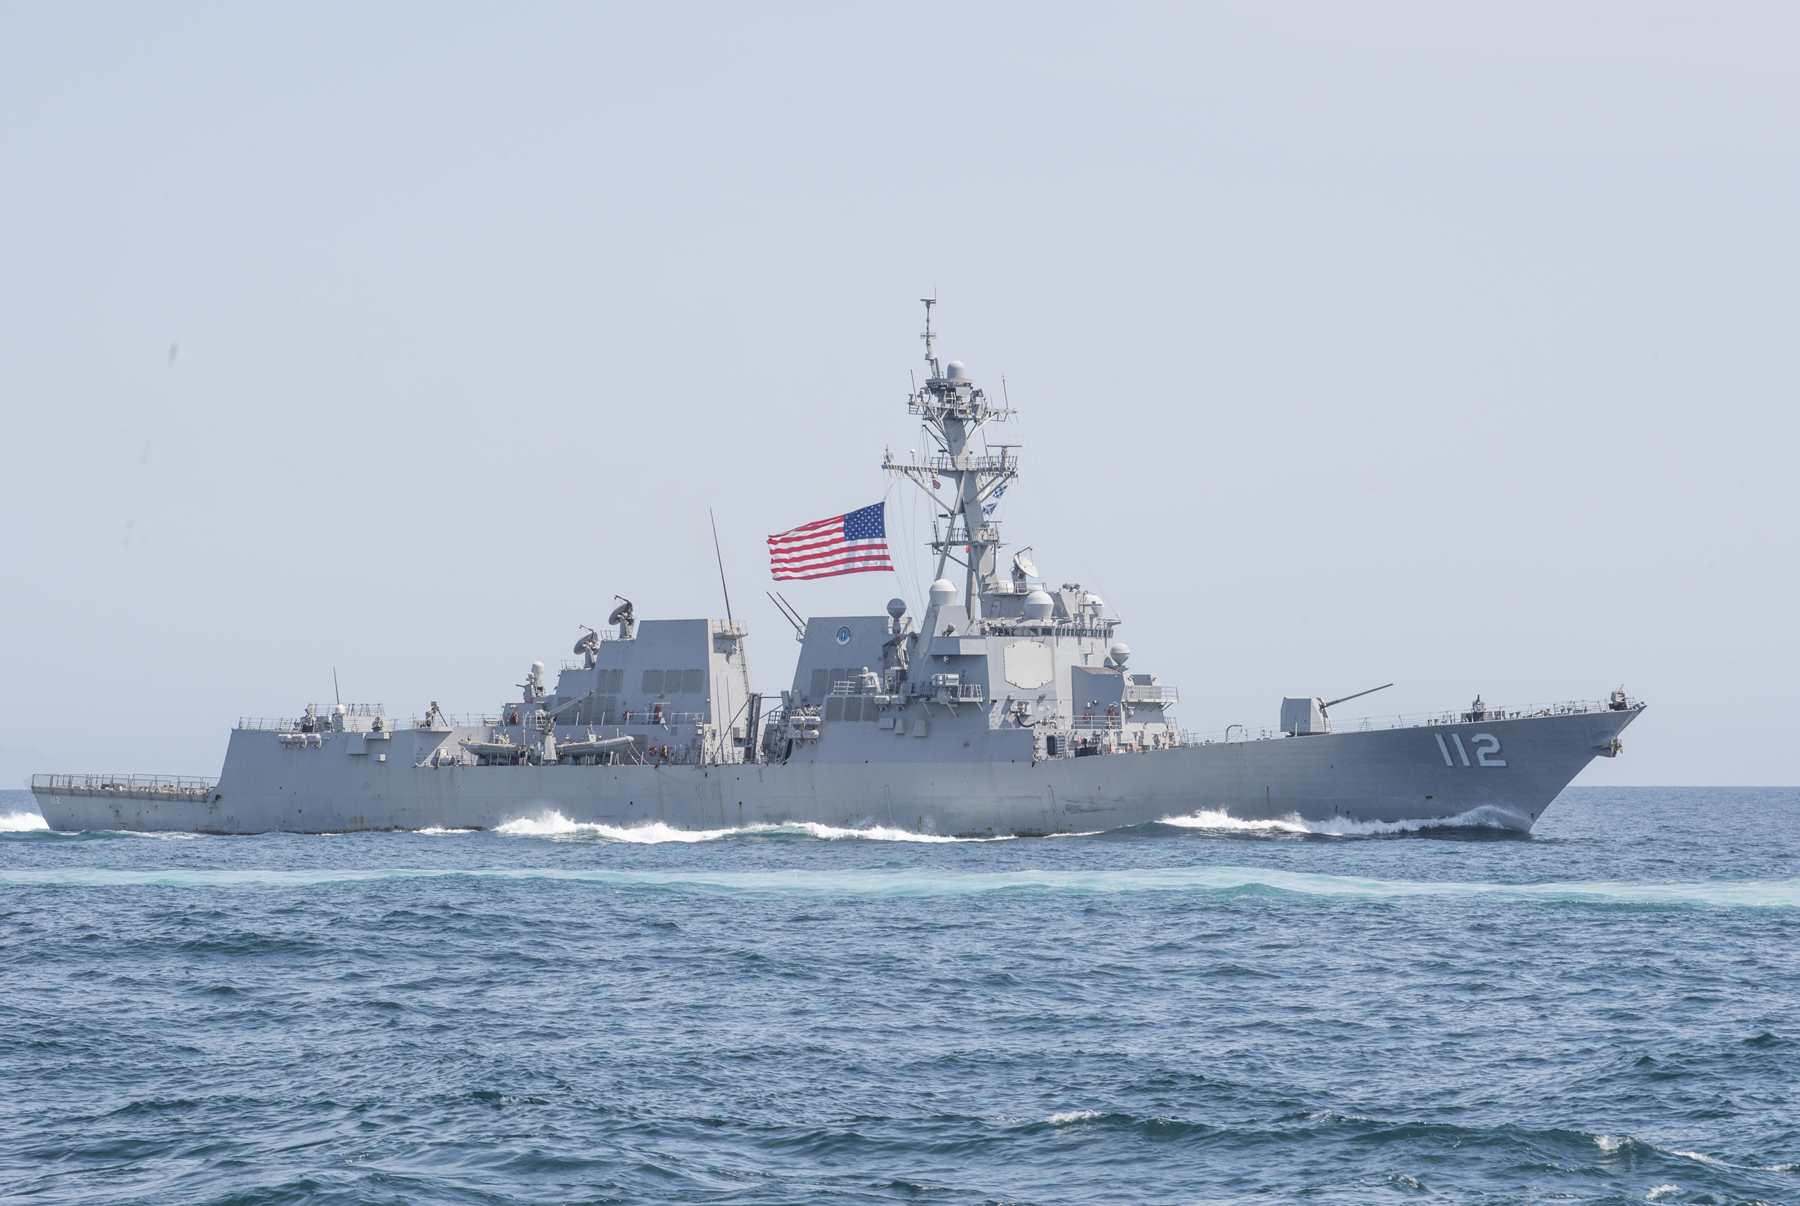 PACIFIC OCEAN (May 3, 2017) The Arleigh Burke-class guided-missile destroyer USS Michael Murphy (DDG 112) transits the western Pacific. The U.S. Navy has patrolled the Indo-Asia-Pacific routinely for more than 70 years promoting regional peace and security. U.S. Navy photo by Mass Communication Specialist 2nd Class Nathan K. Serpico. -